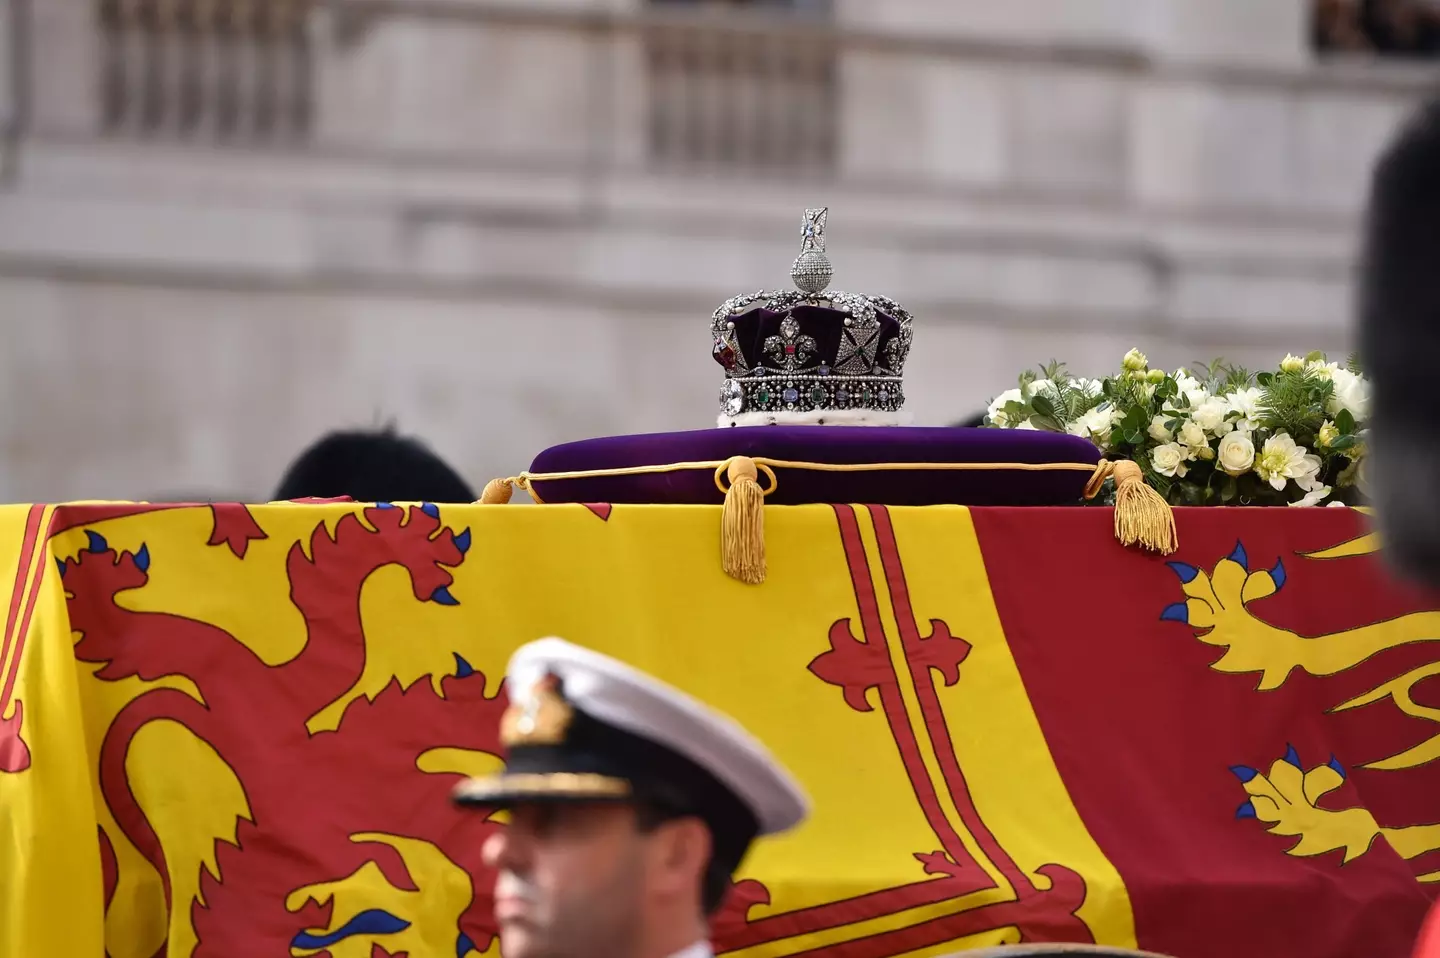 The Queen was moved from Westminster Abbey to her final resting place.